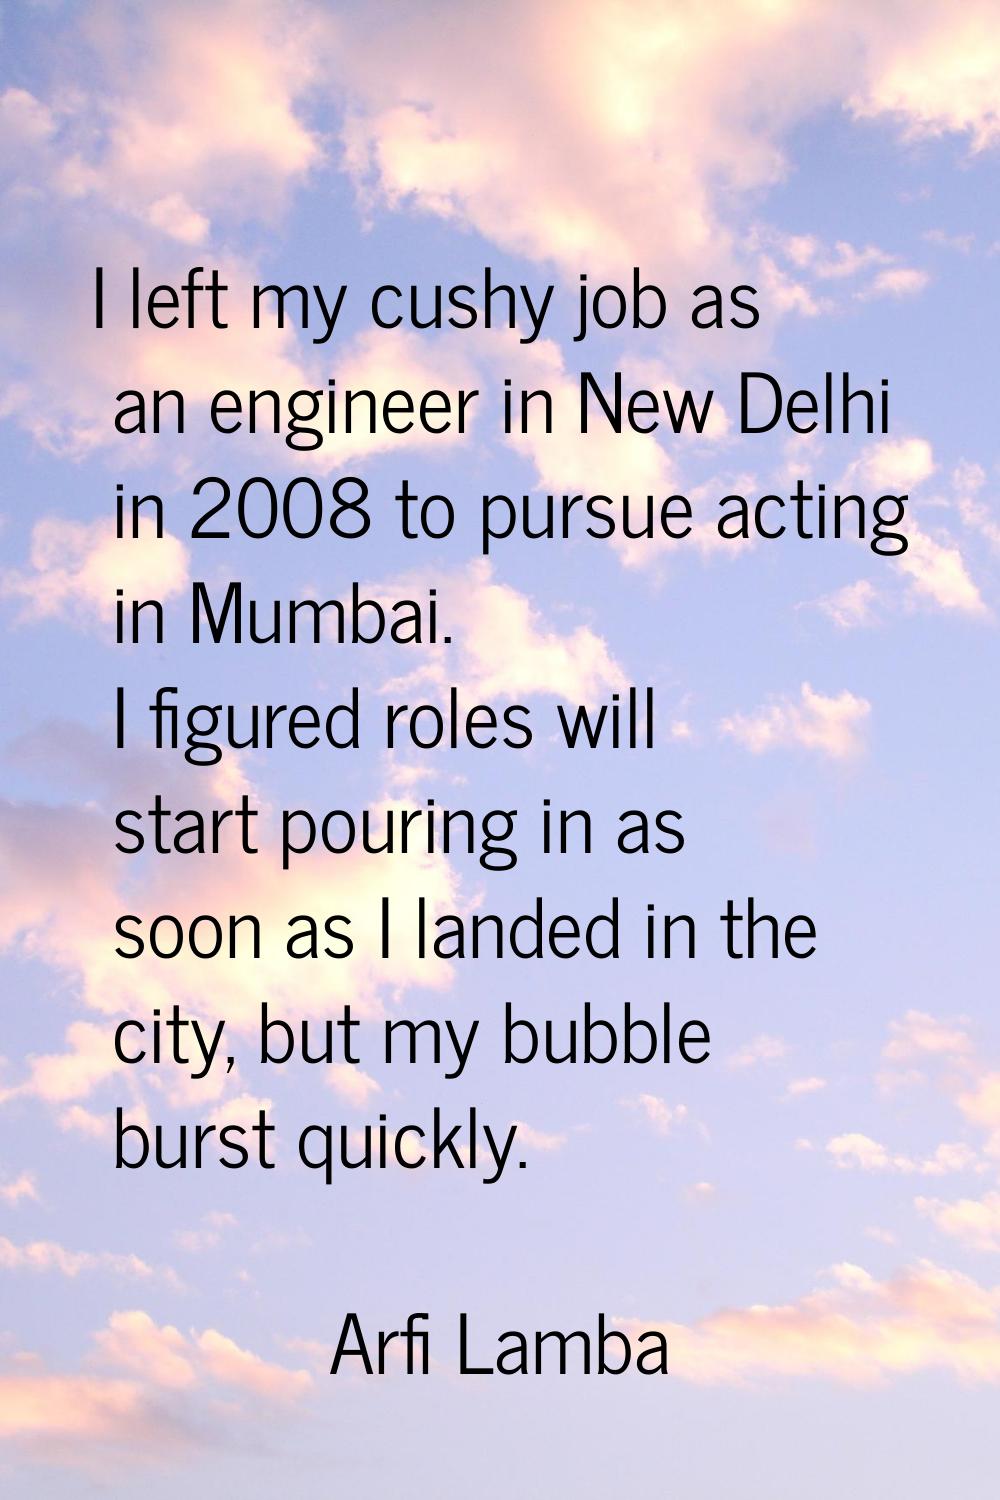 I left my cushy job as an engineer in New Delhi in 2008 to pursue acting in Mumbai. I figured roles